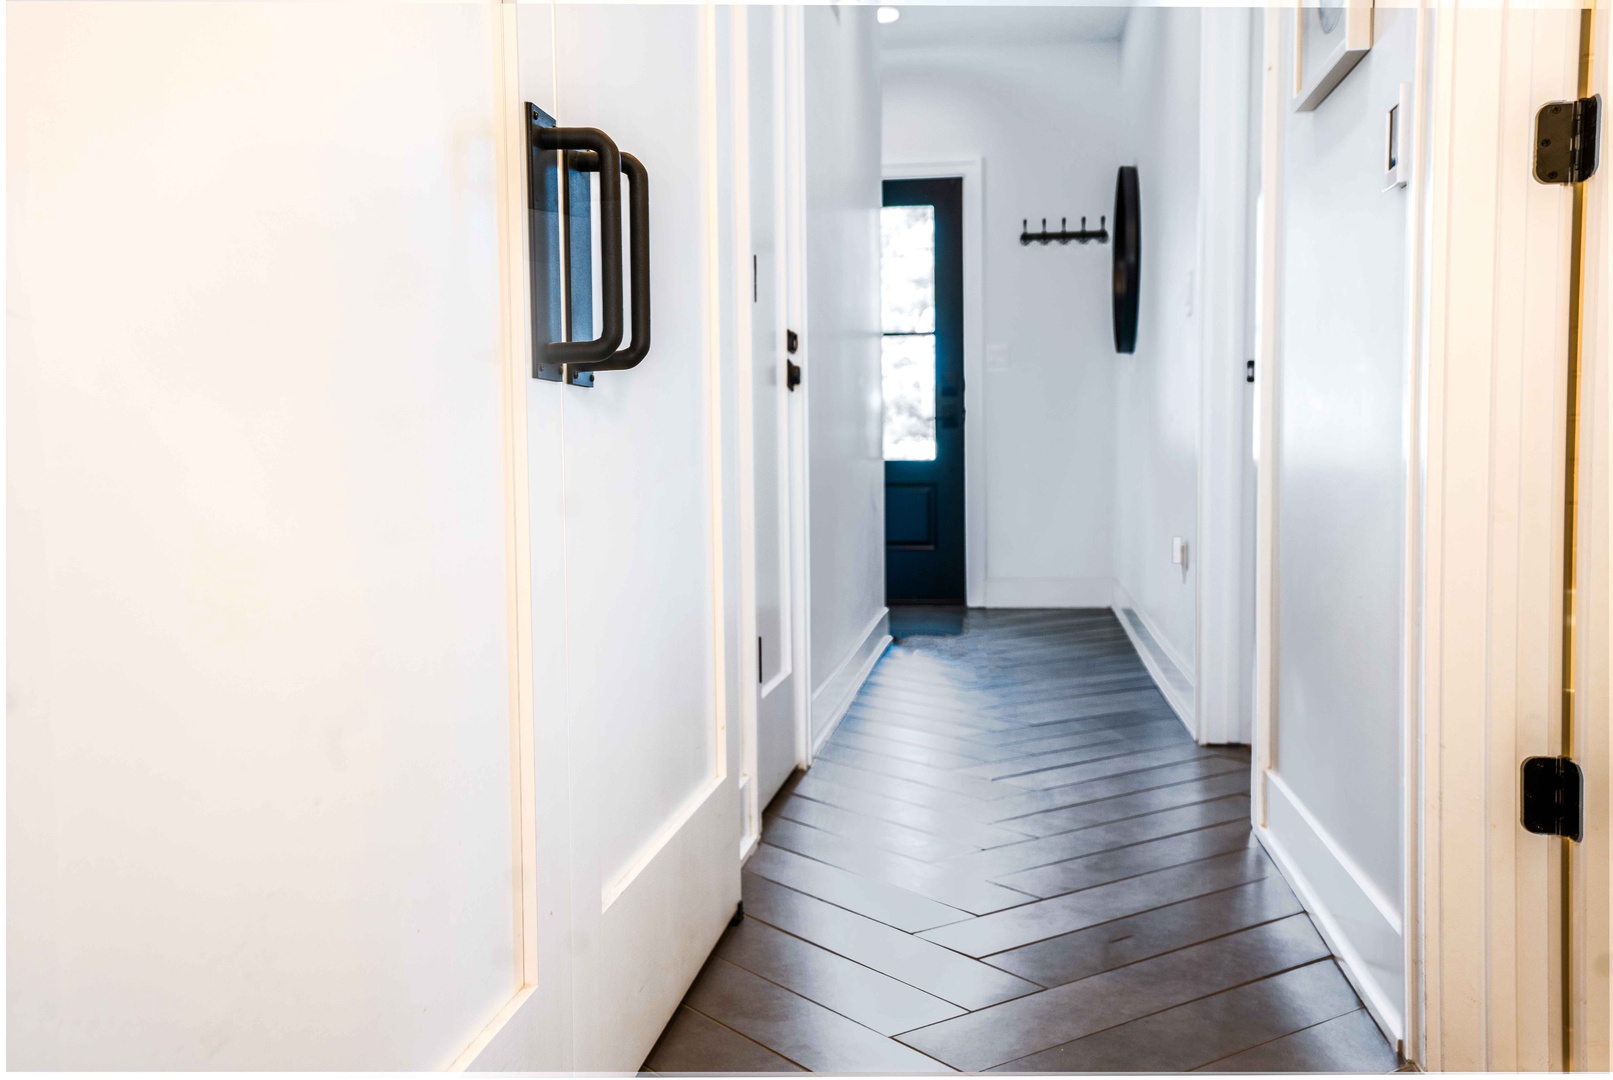 The bright and inviting entryway extends a warm welcome